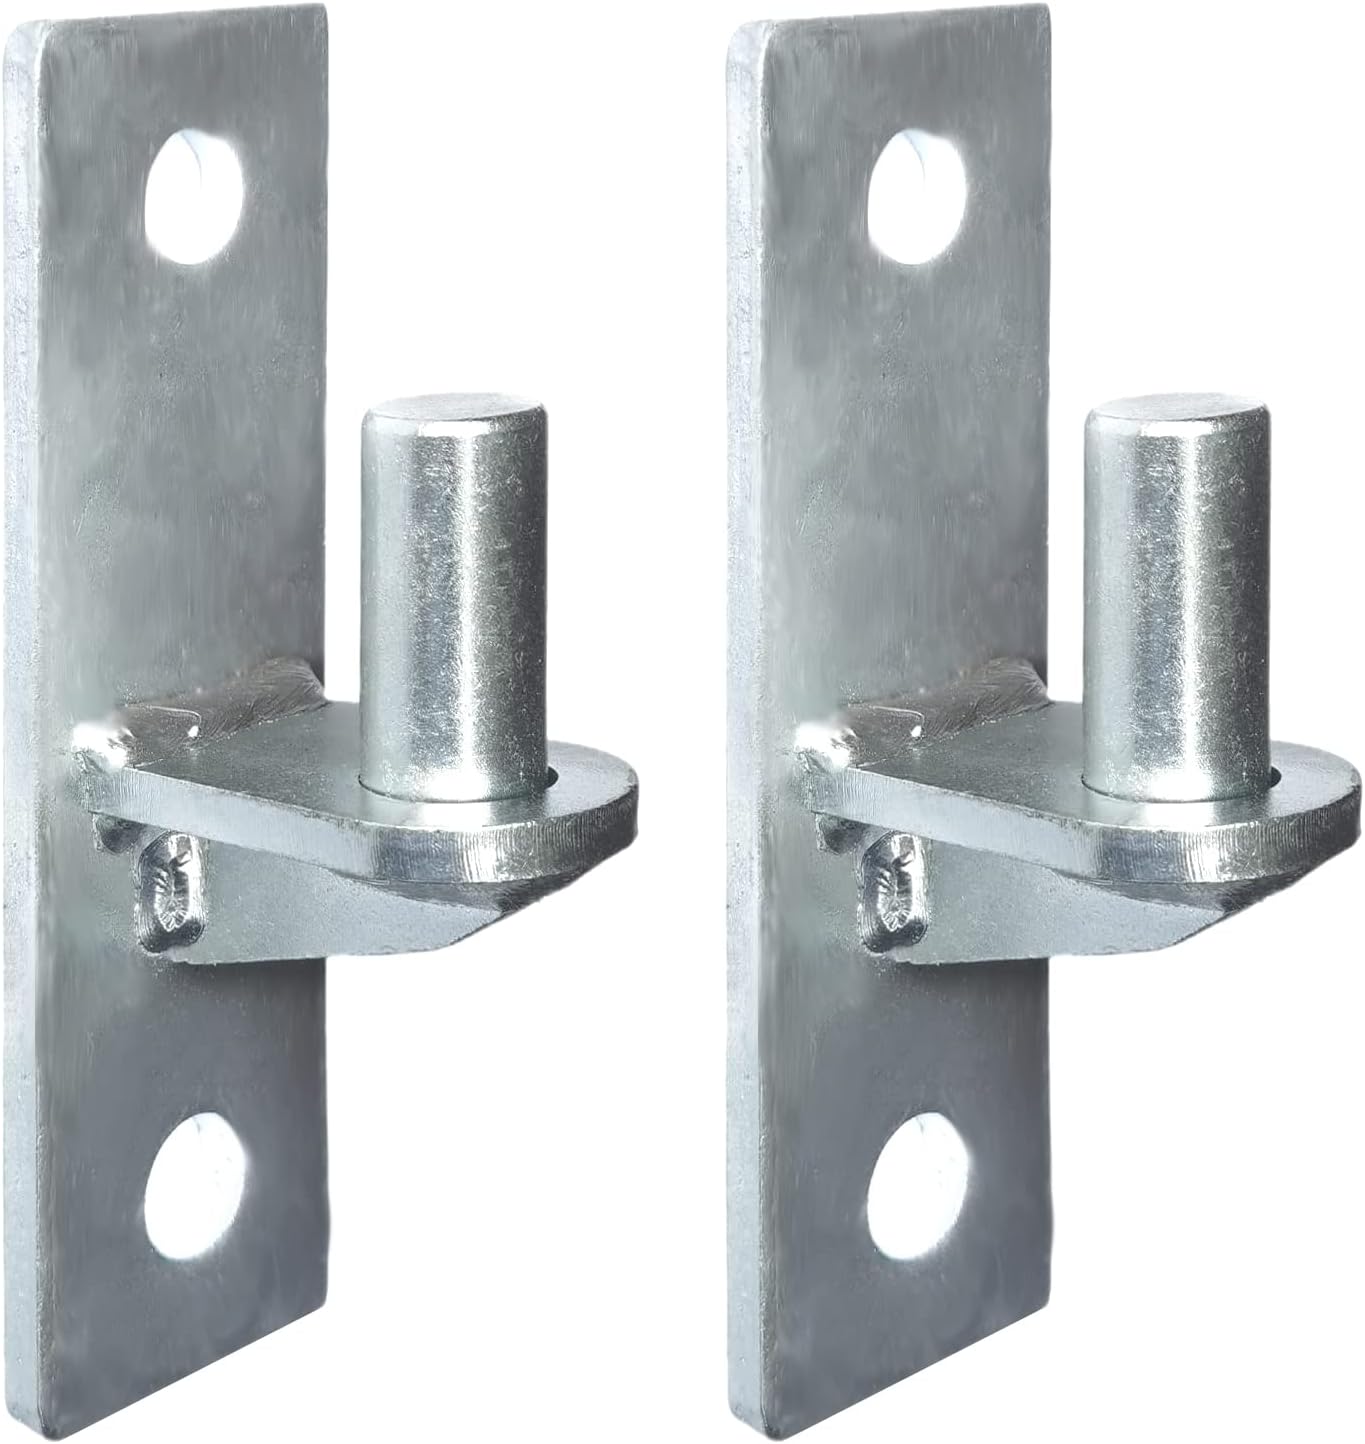 Glensam 2 Pack Wall Mount Gate Hinges, Heavy Duty Wall Plate Hinges, Outdoor Chain Link Fence Gate Hinges Fence Post Link Gate Hinge, w